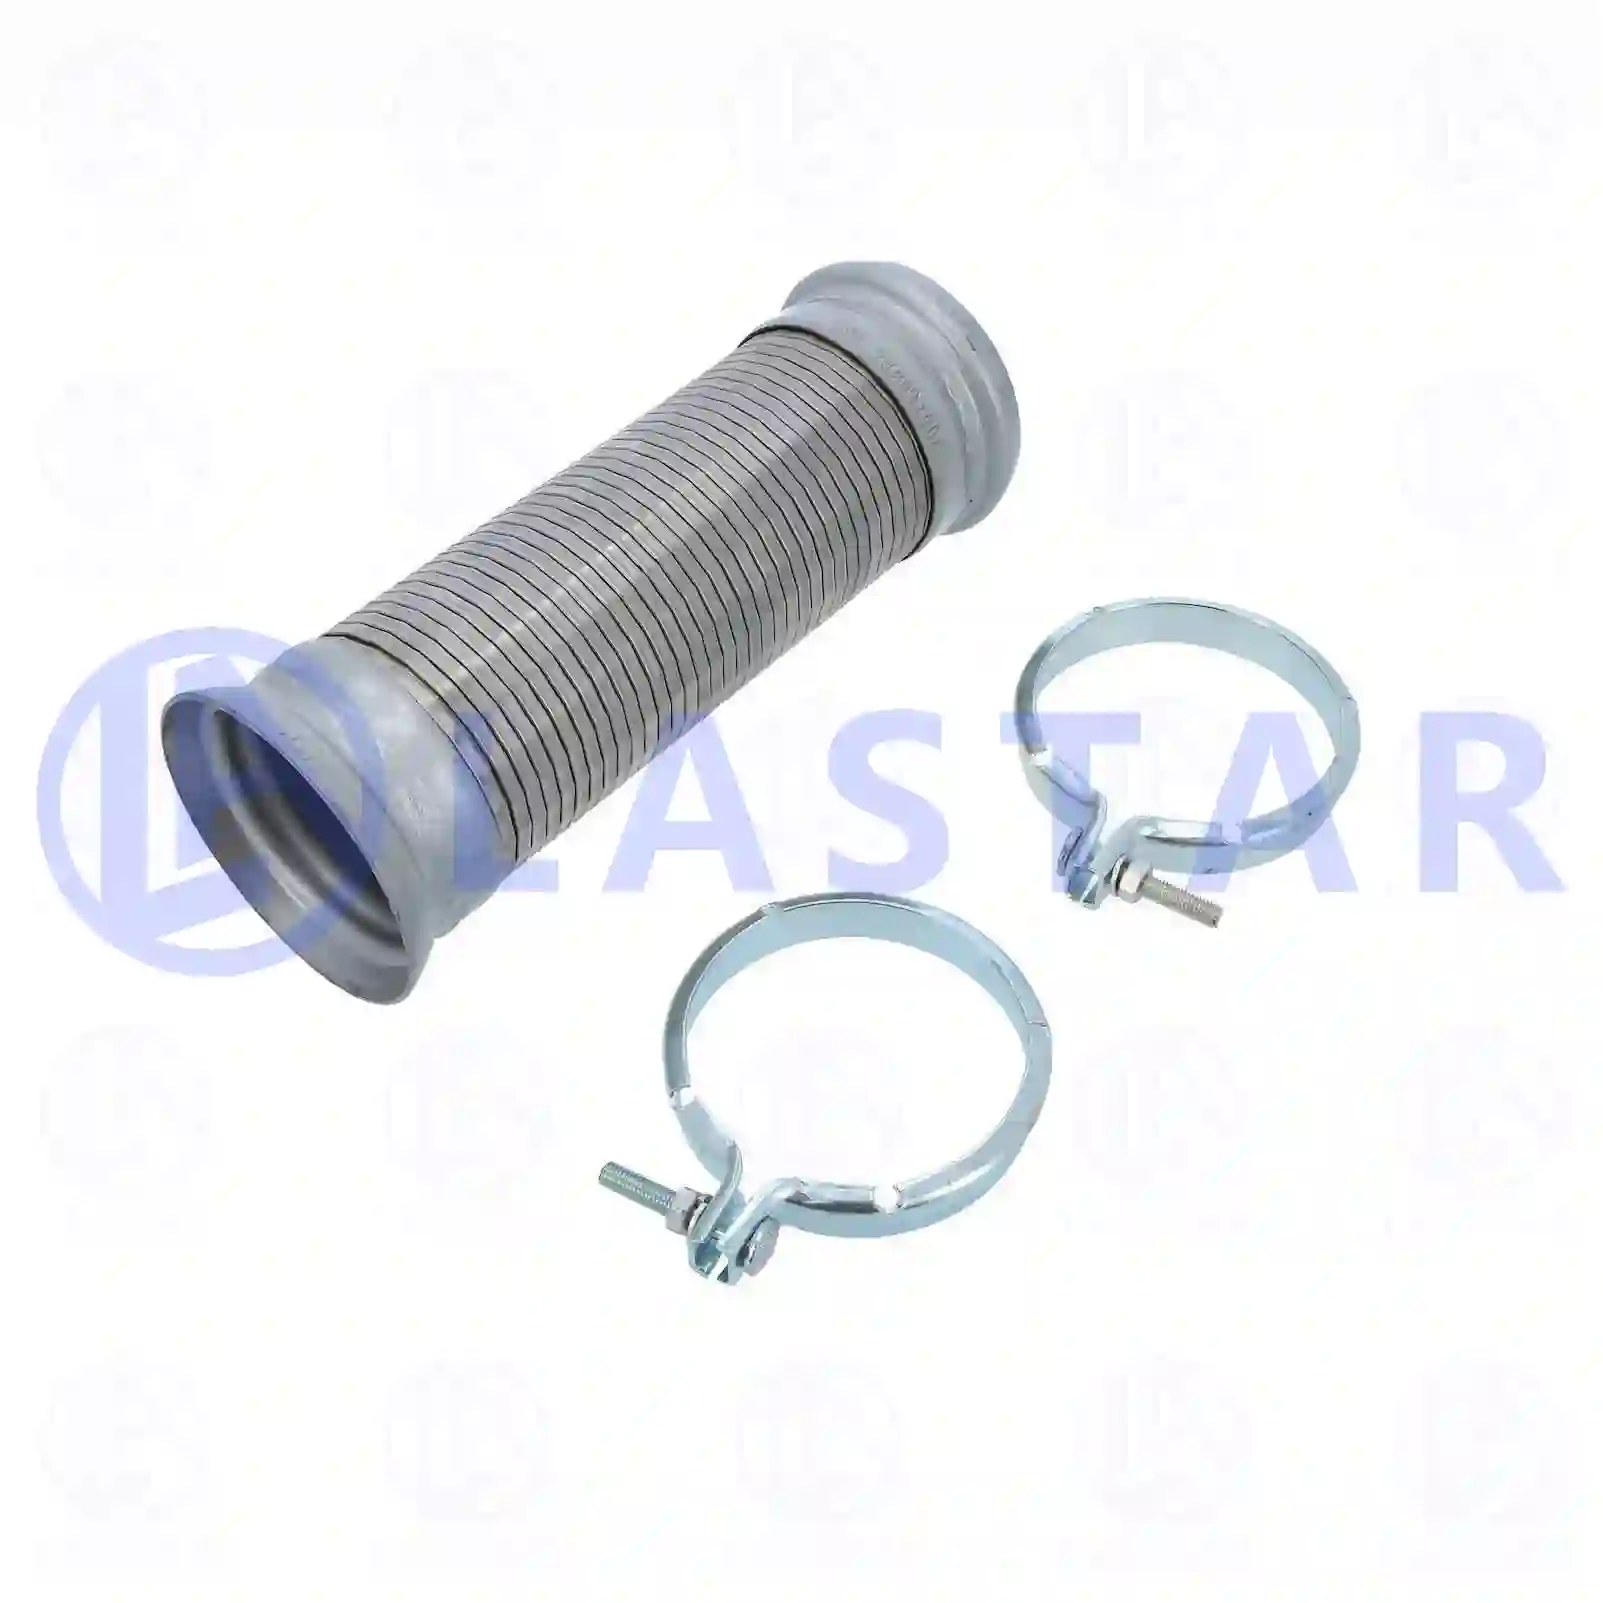  Flexible pipe, with clamps || Lastar Spare Part | Truck Spare Parts, Auotomotive Spare Parts